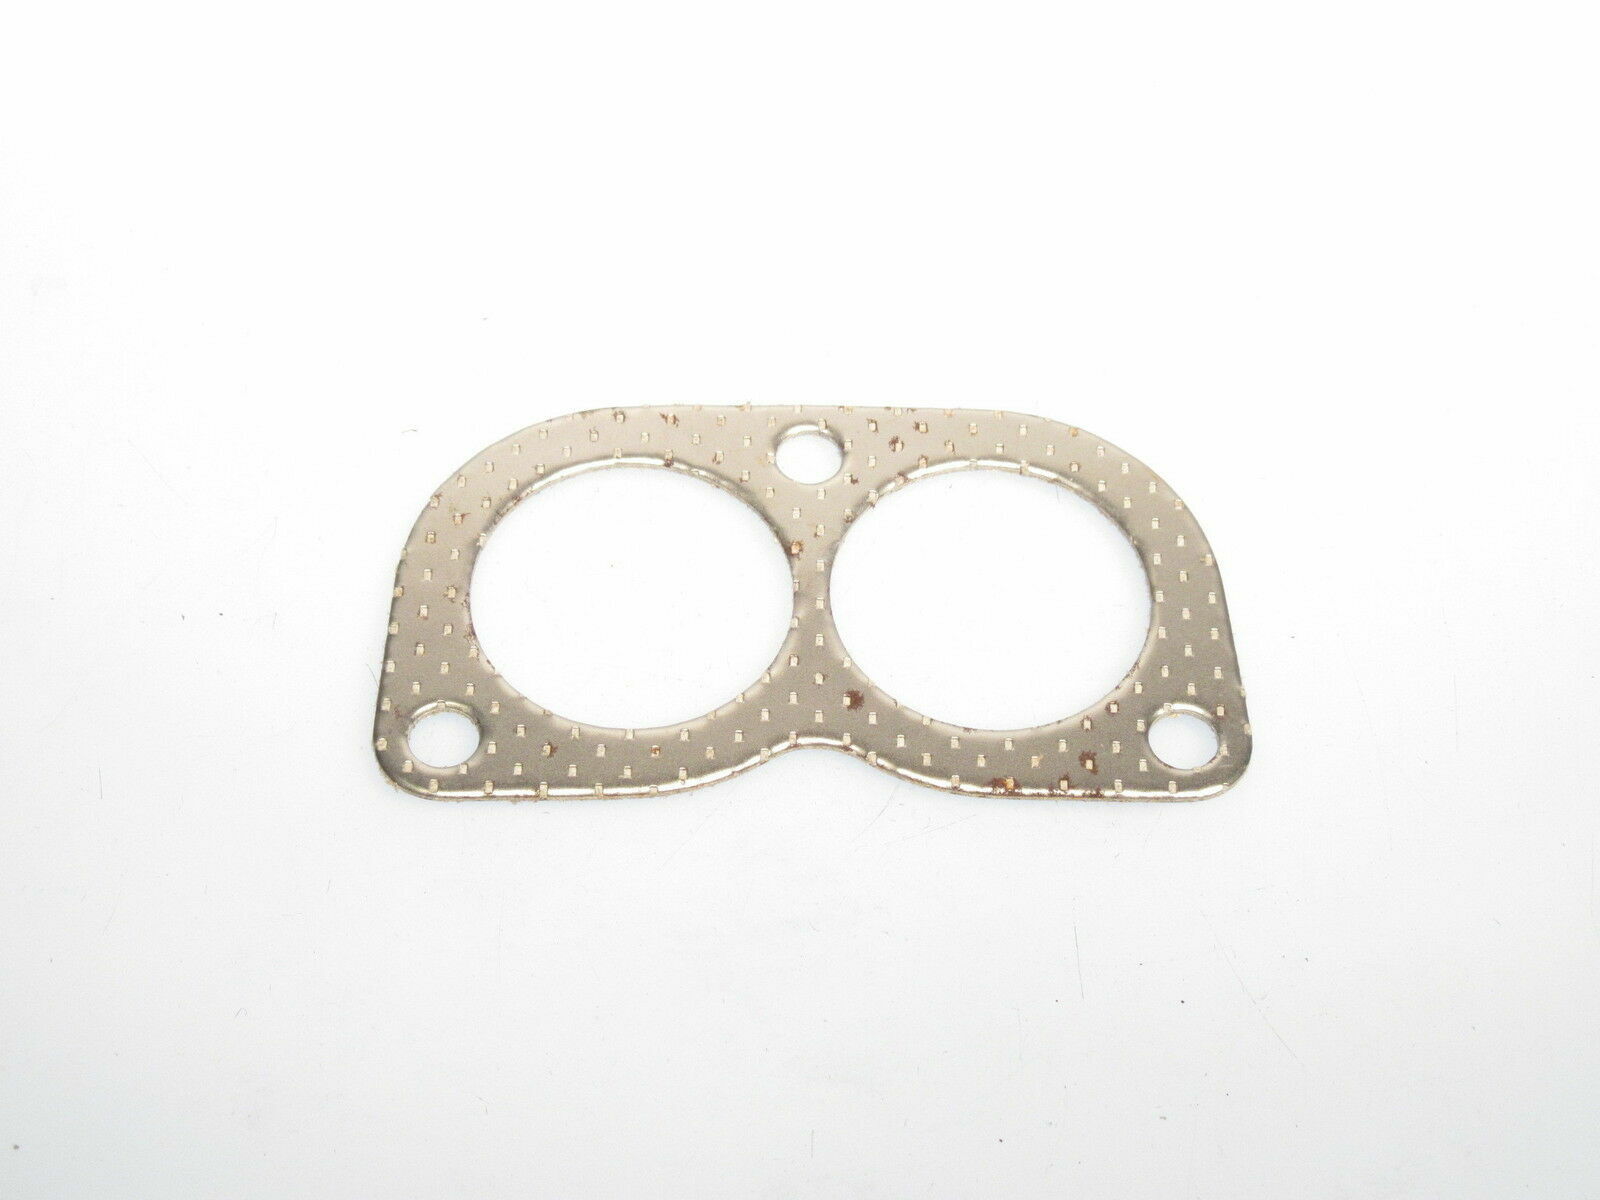 Exhaust Flange Gasket Fits Nissan 510 610 710 200SX 521 & 620 Pickup  49-64260